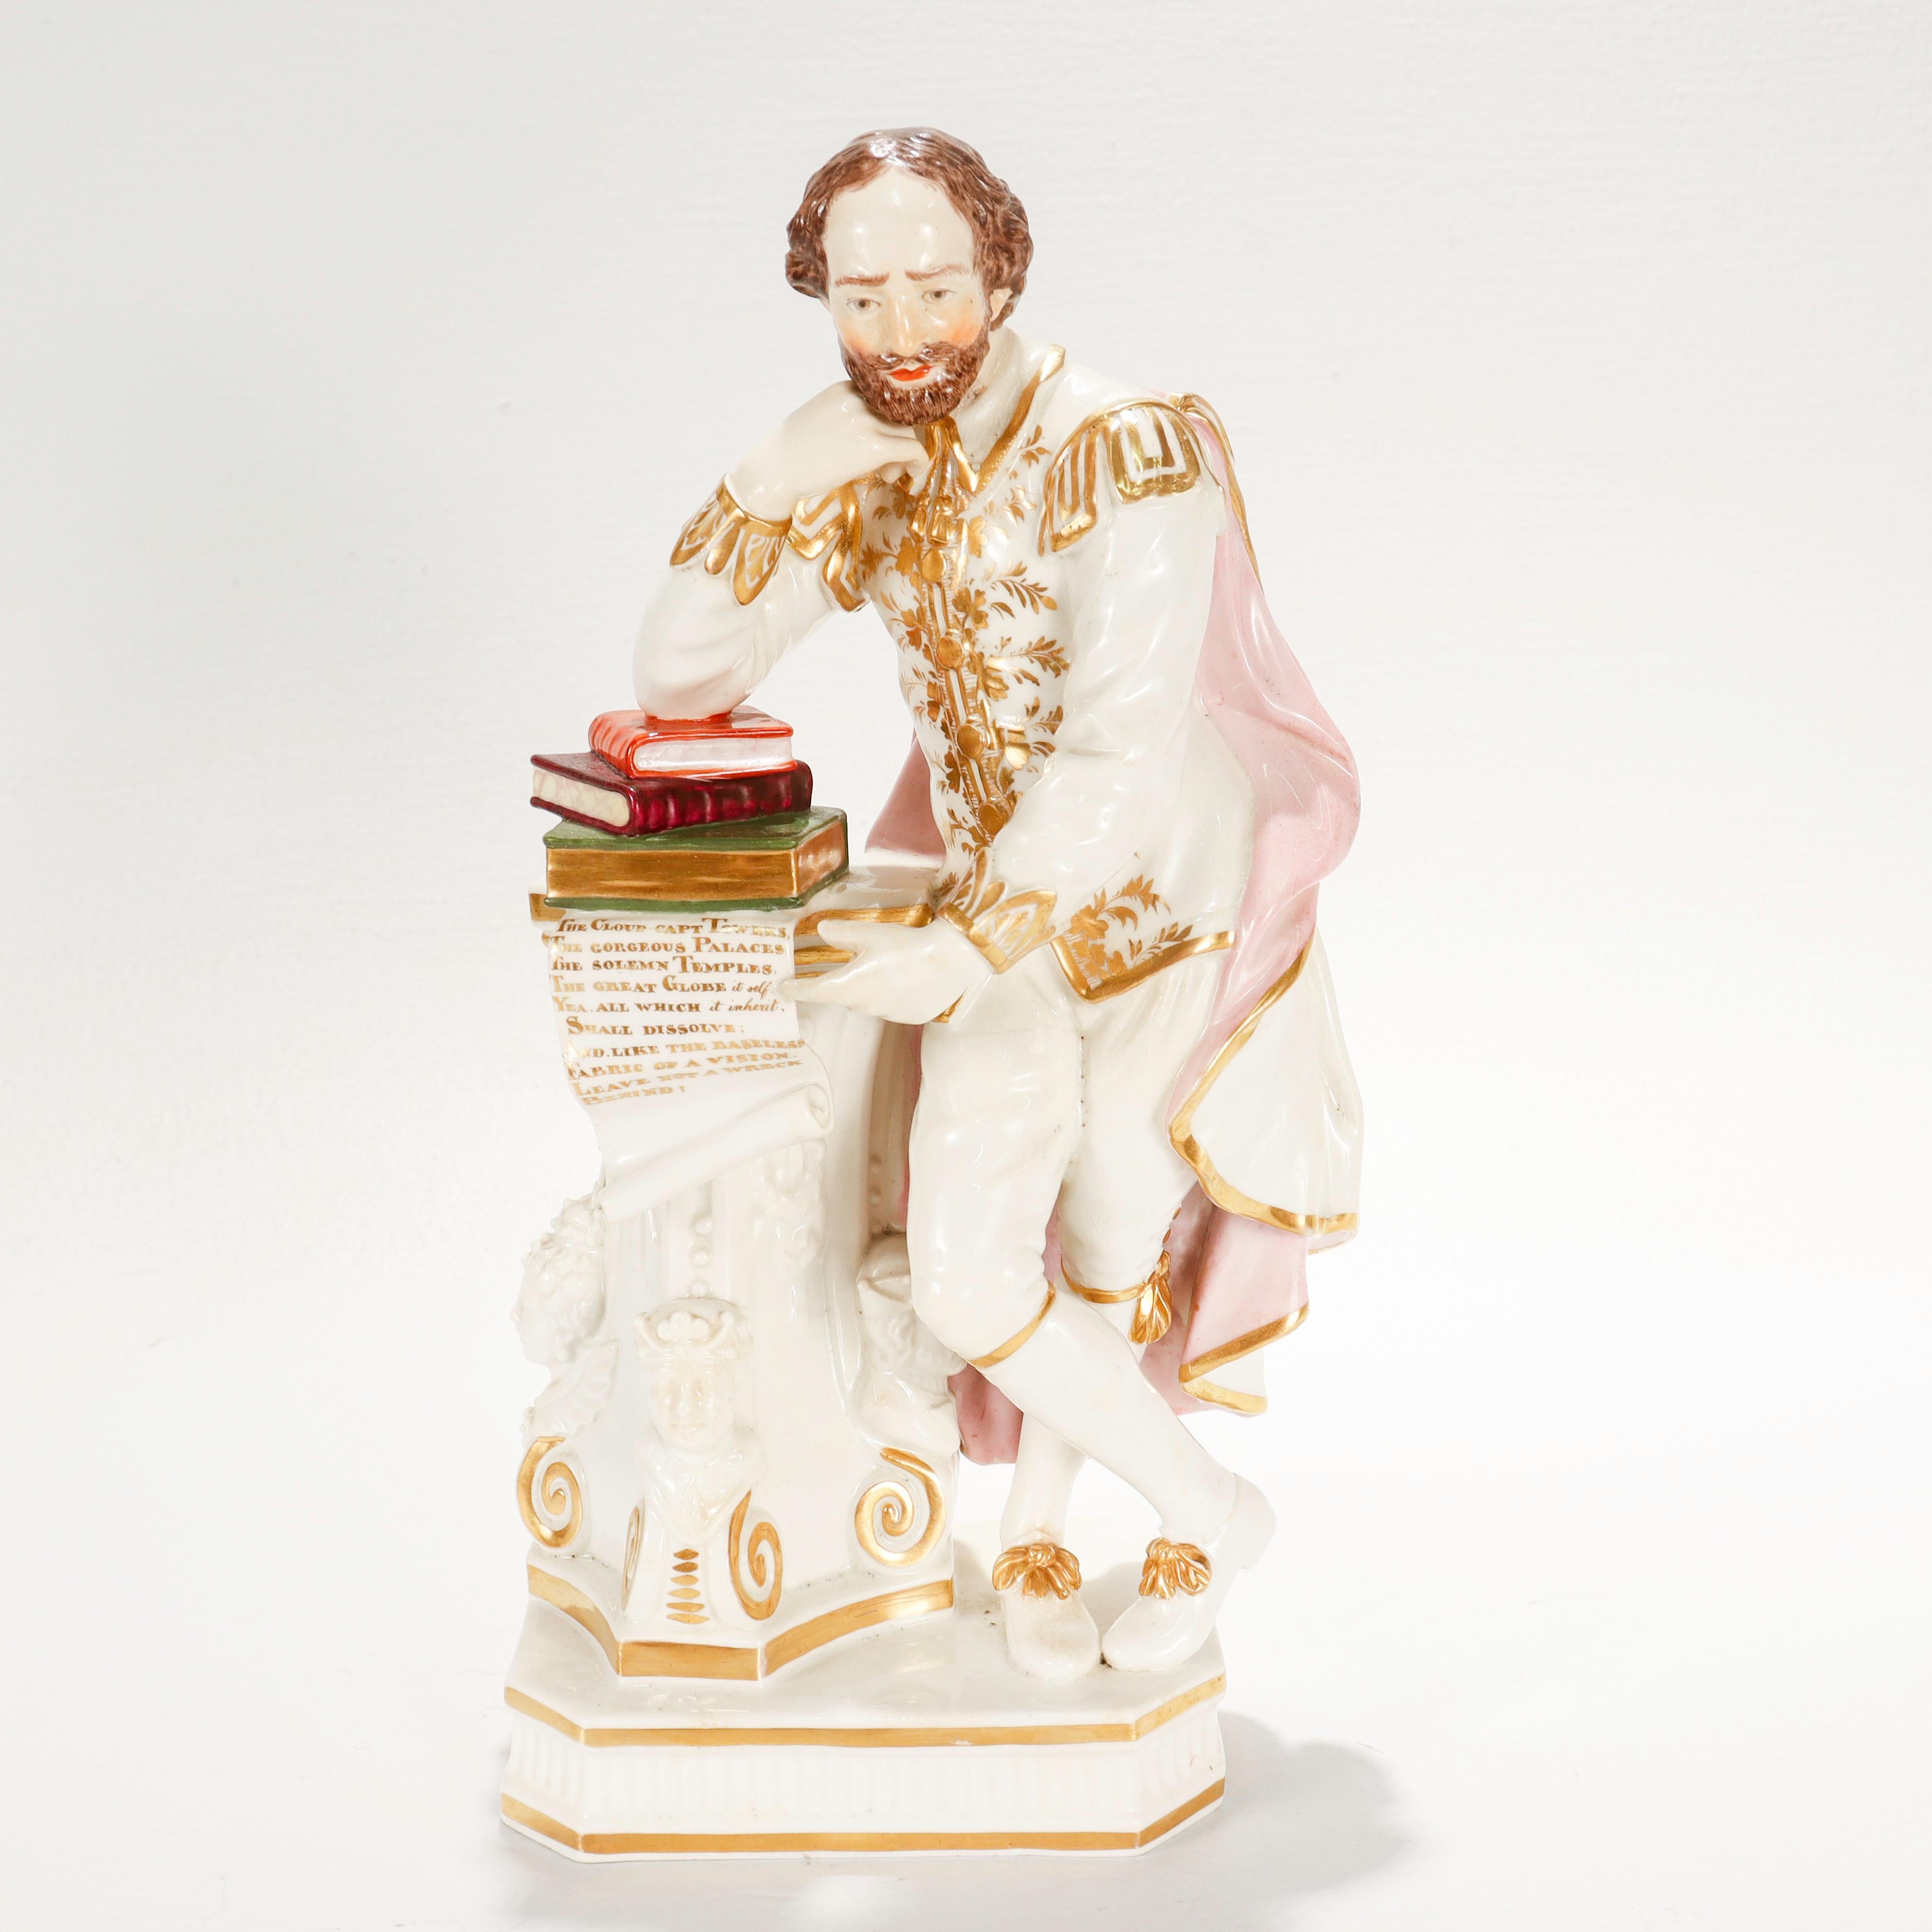 A fine antique English porcelain figurine.

By Derby.

In the form of William Shakespeare. 

Depicting a Shakespeare that leans onto a book-covered plinth with his hand supporting his chin. His other hand points to a scroll that dangles from